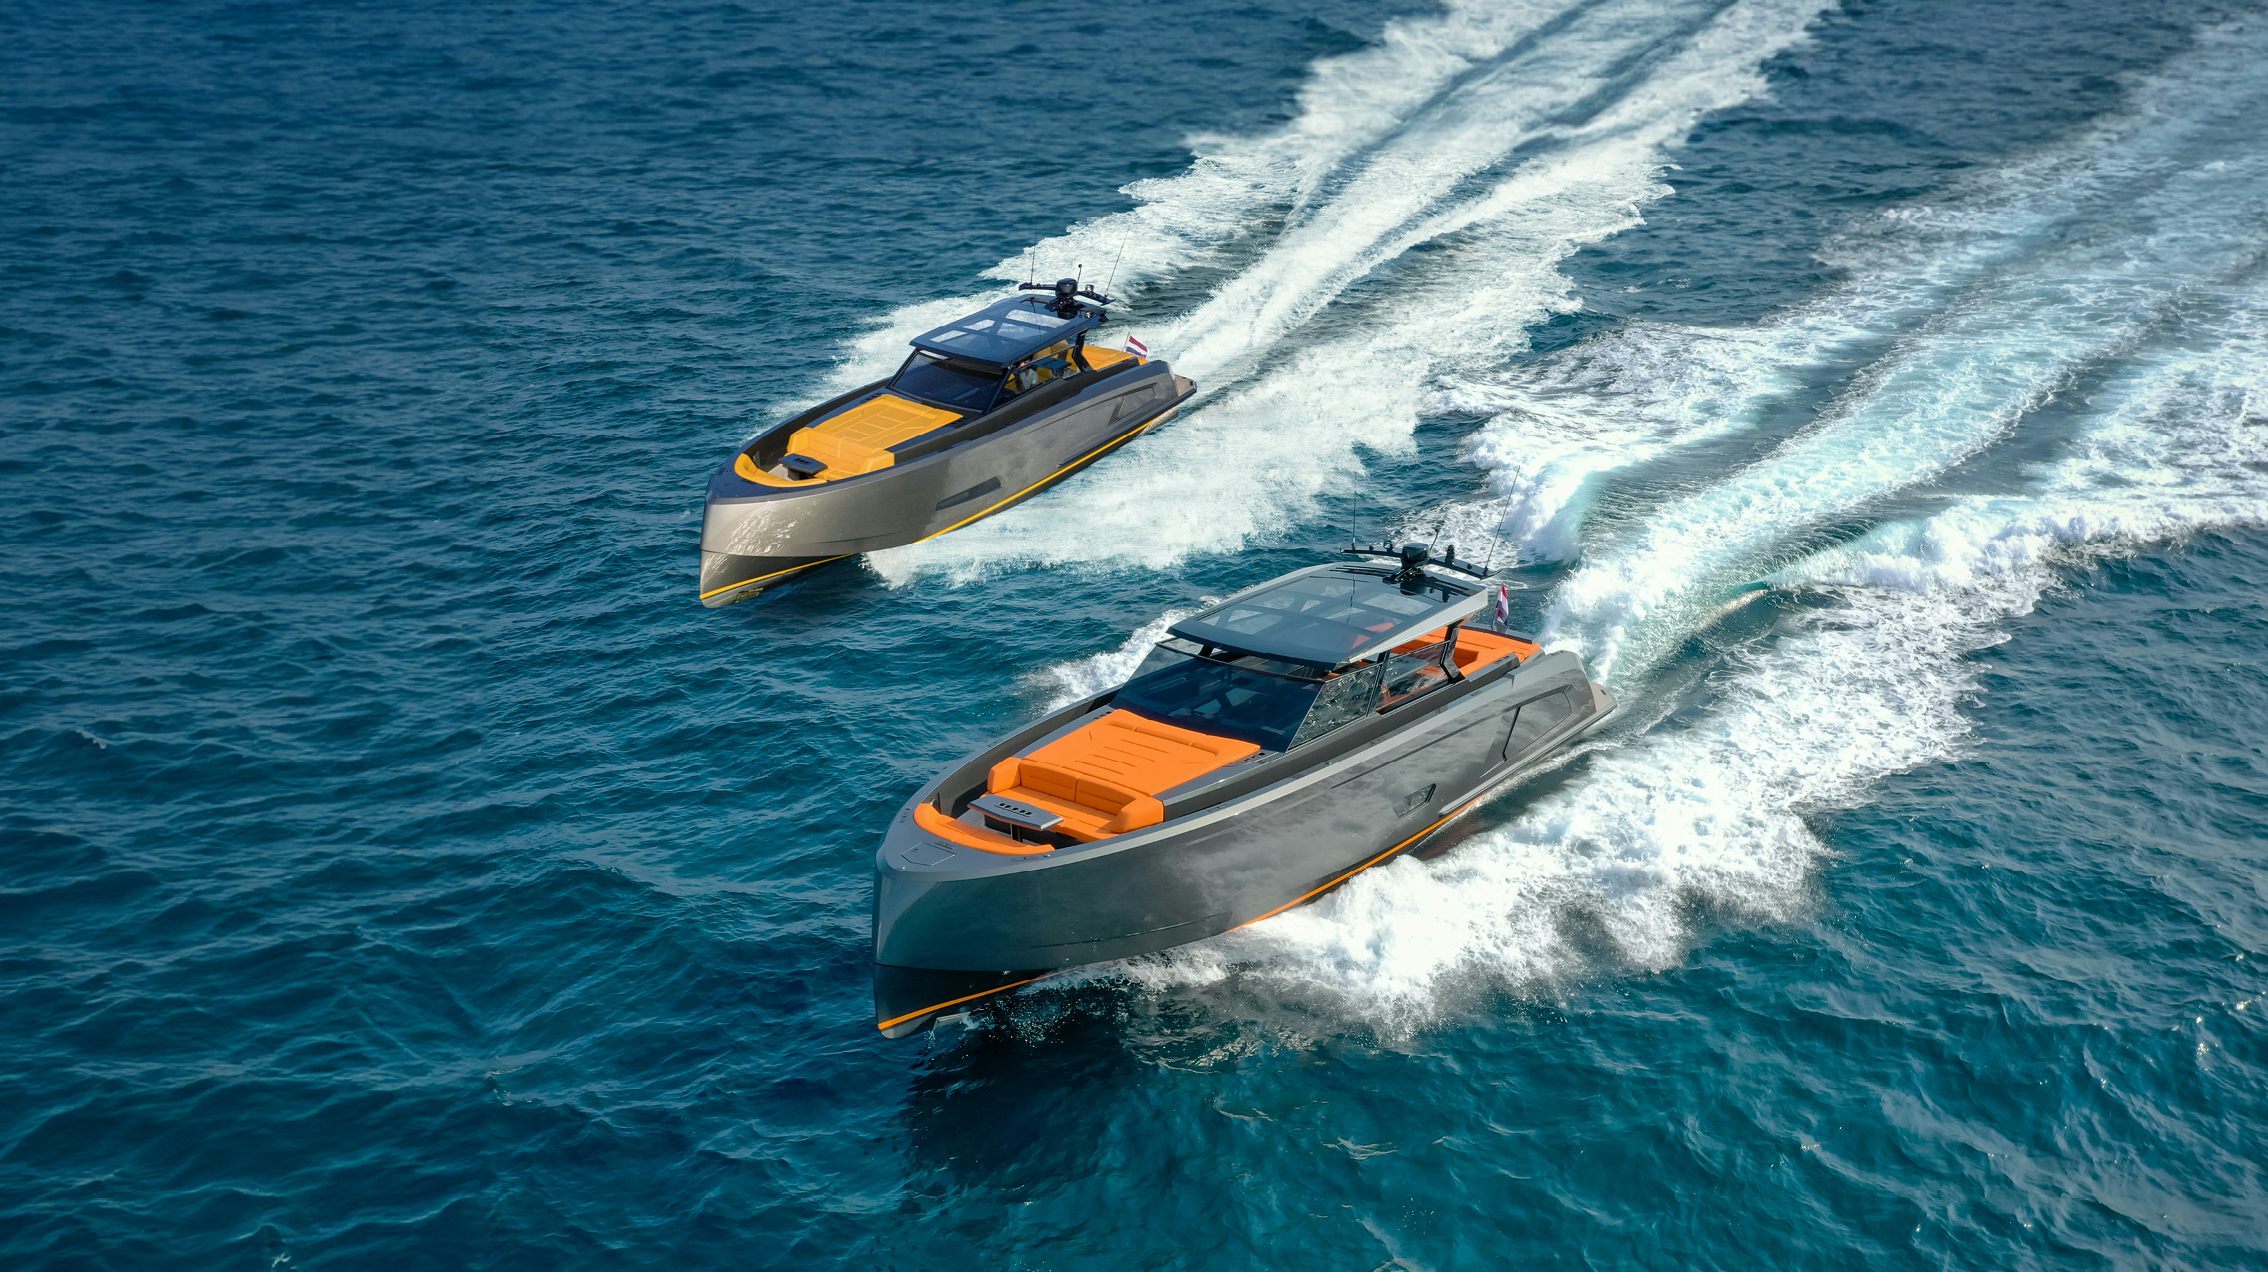 Visit Vanquish at the Cannes Yachting Festival 2023